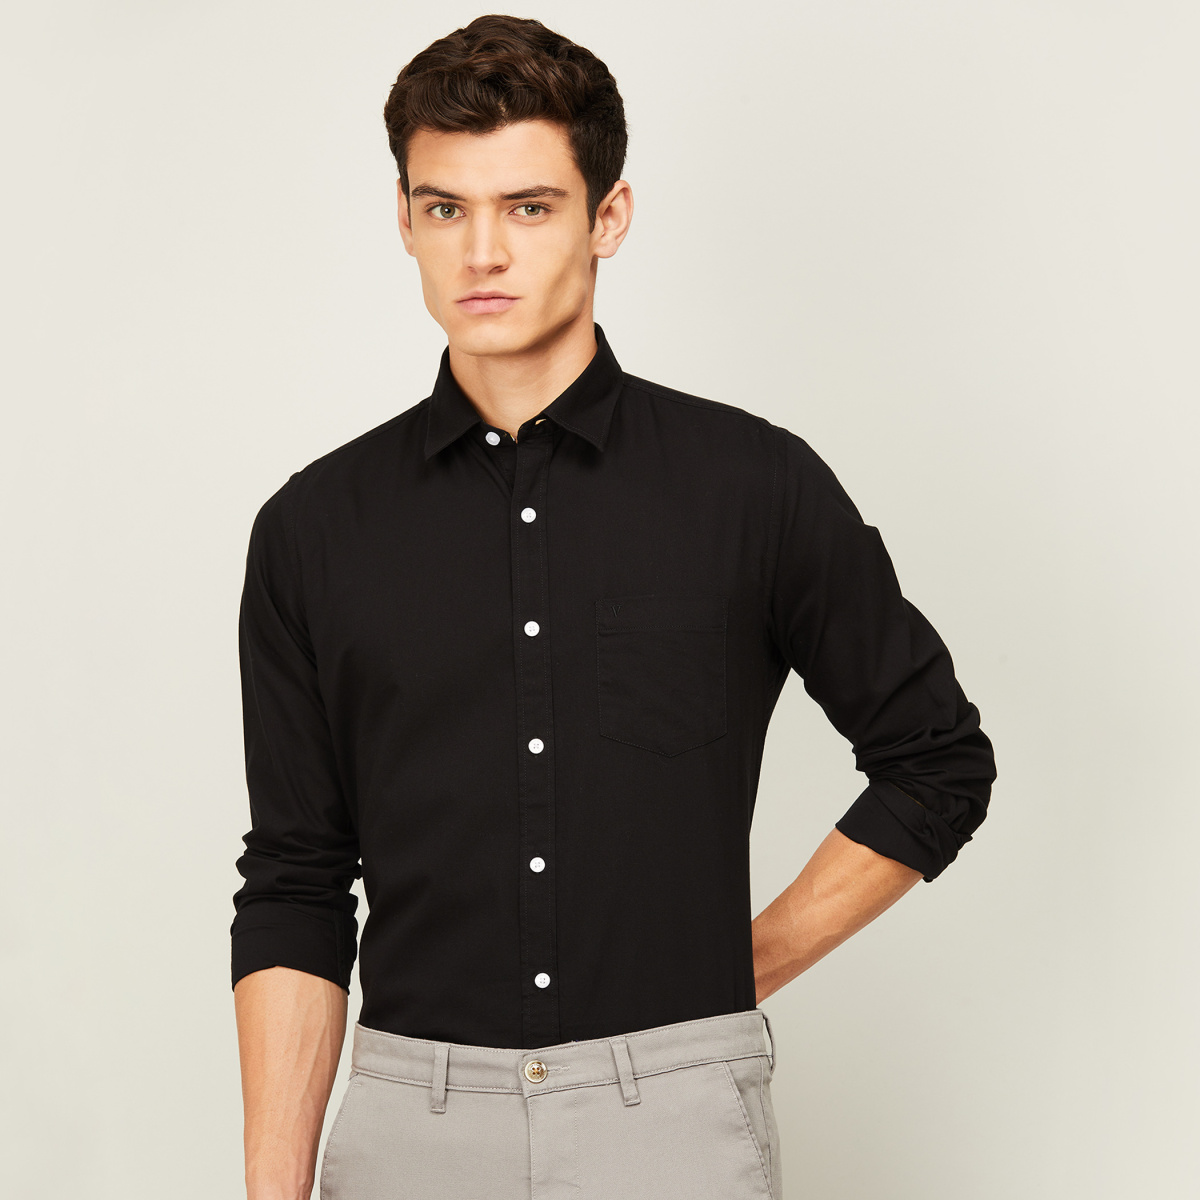 VH SPORTS Men Solid Spread Collar Slim Fit Casual Shirt